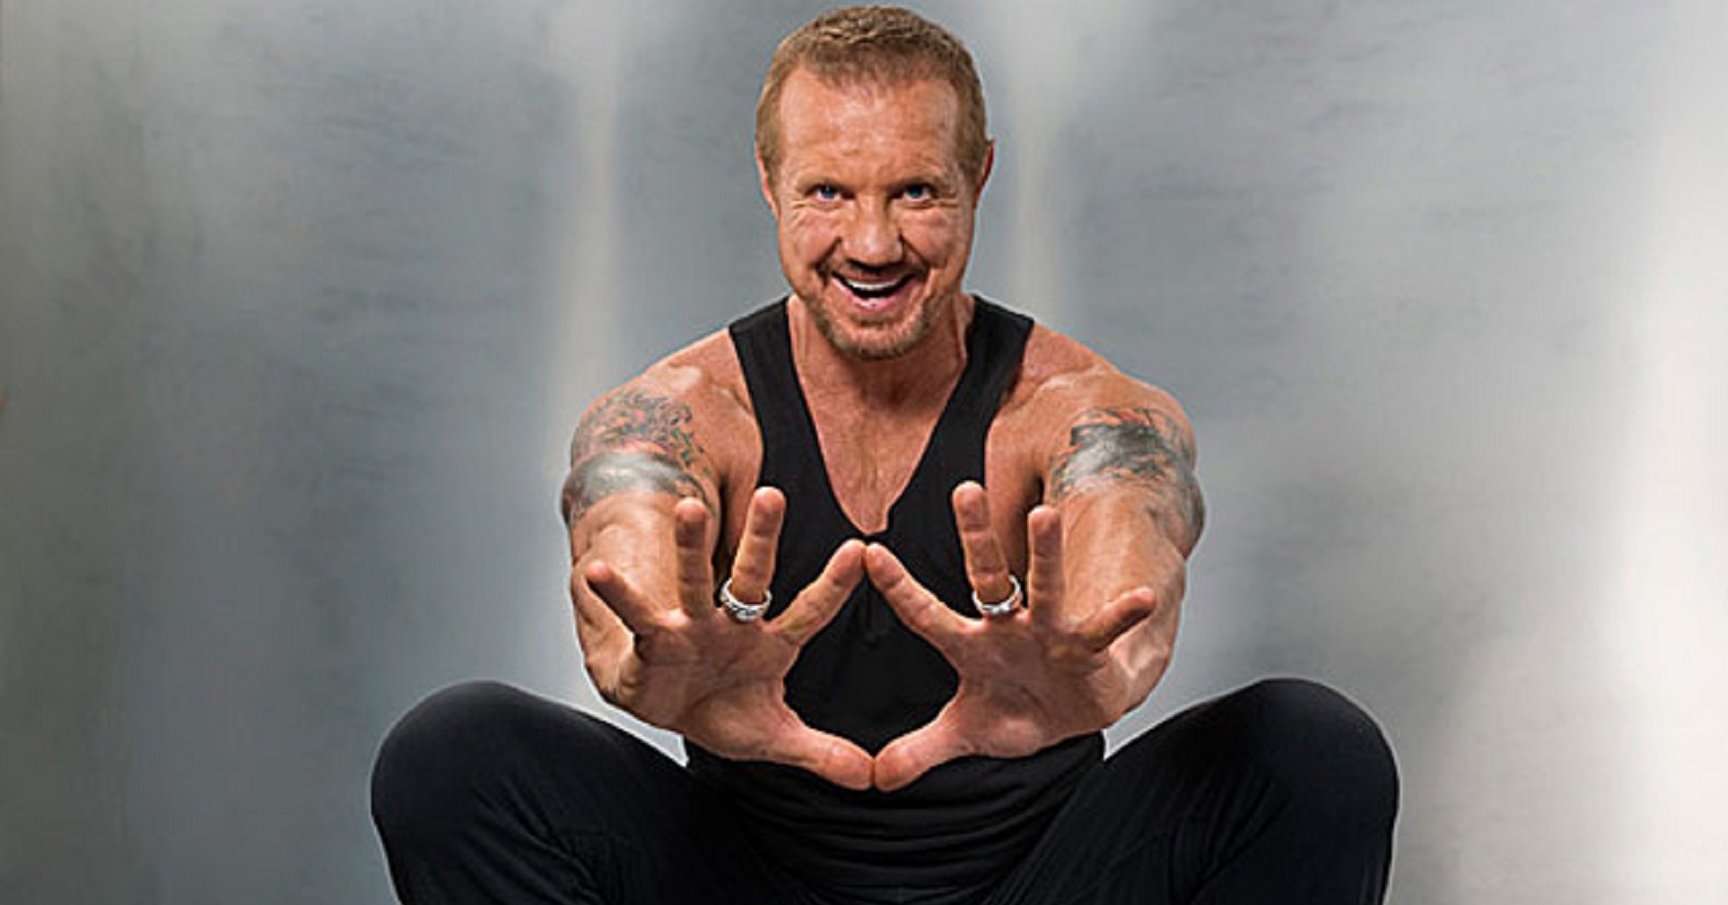 DDP Yoga CEO, Diamond Dallas Page to appear on Listen In With KNN